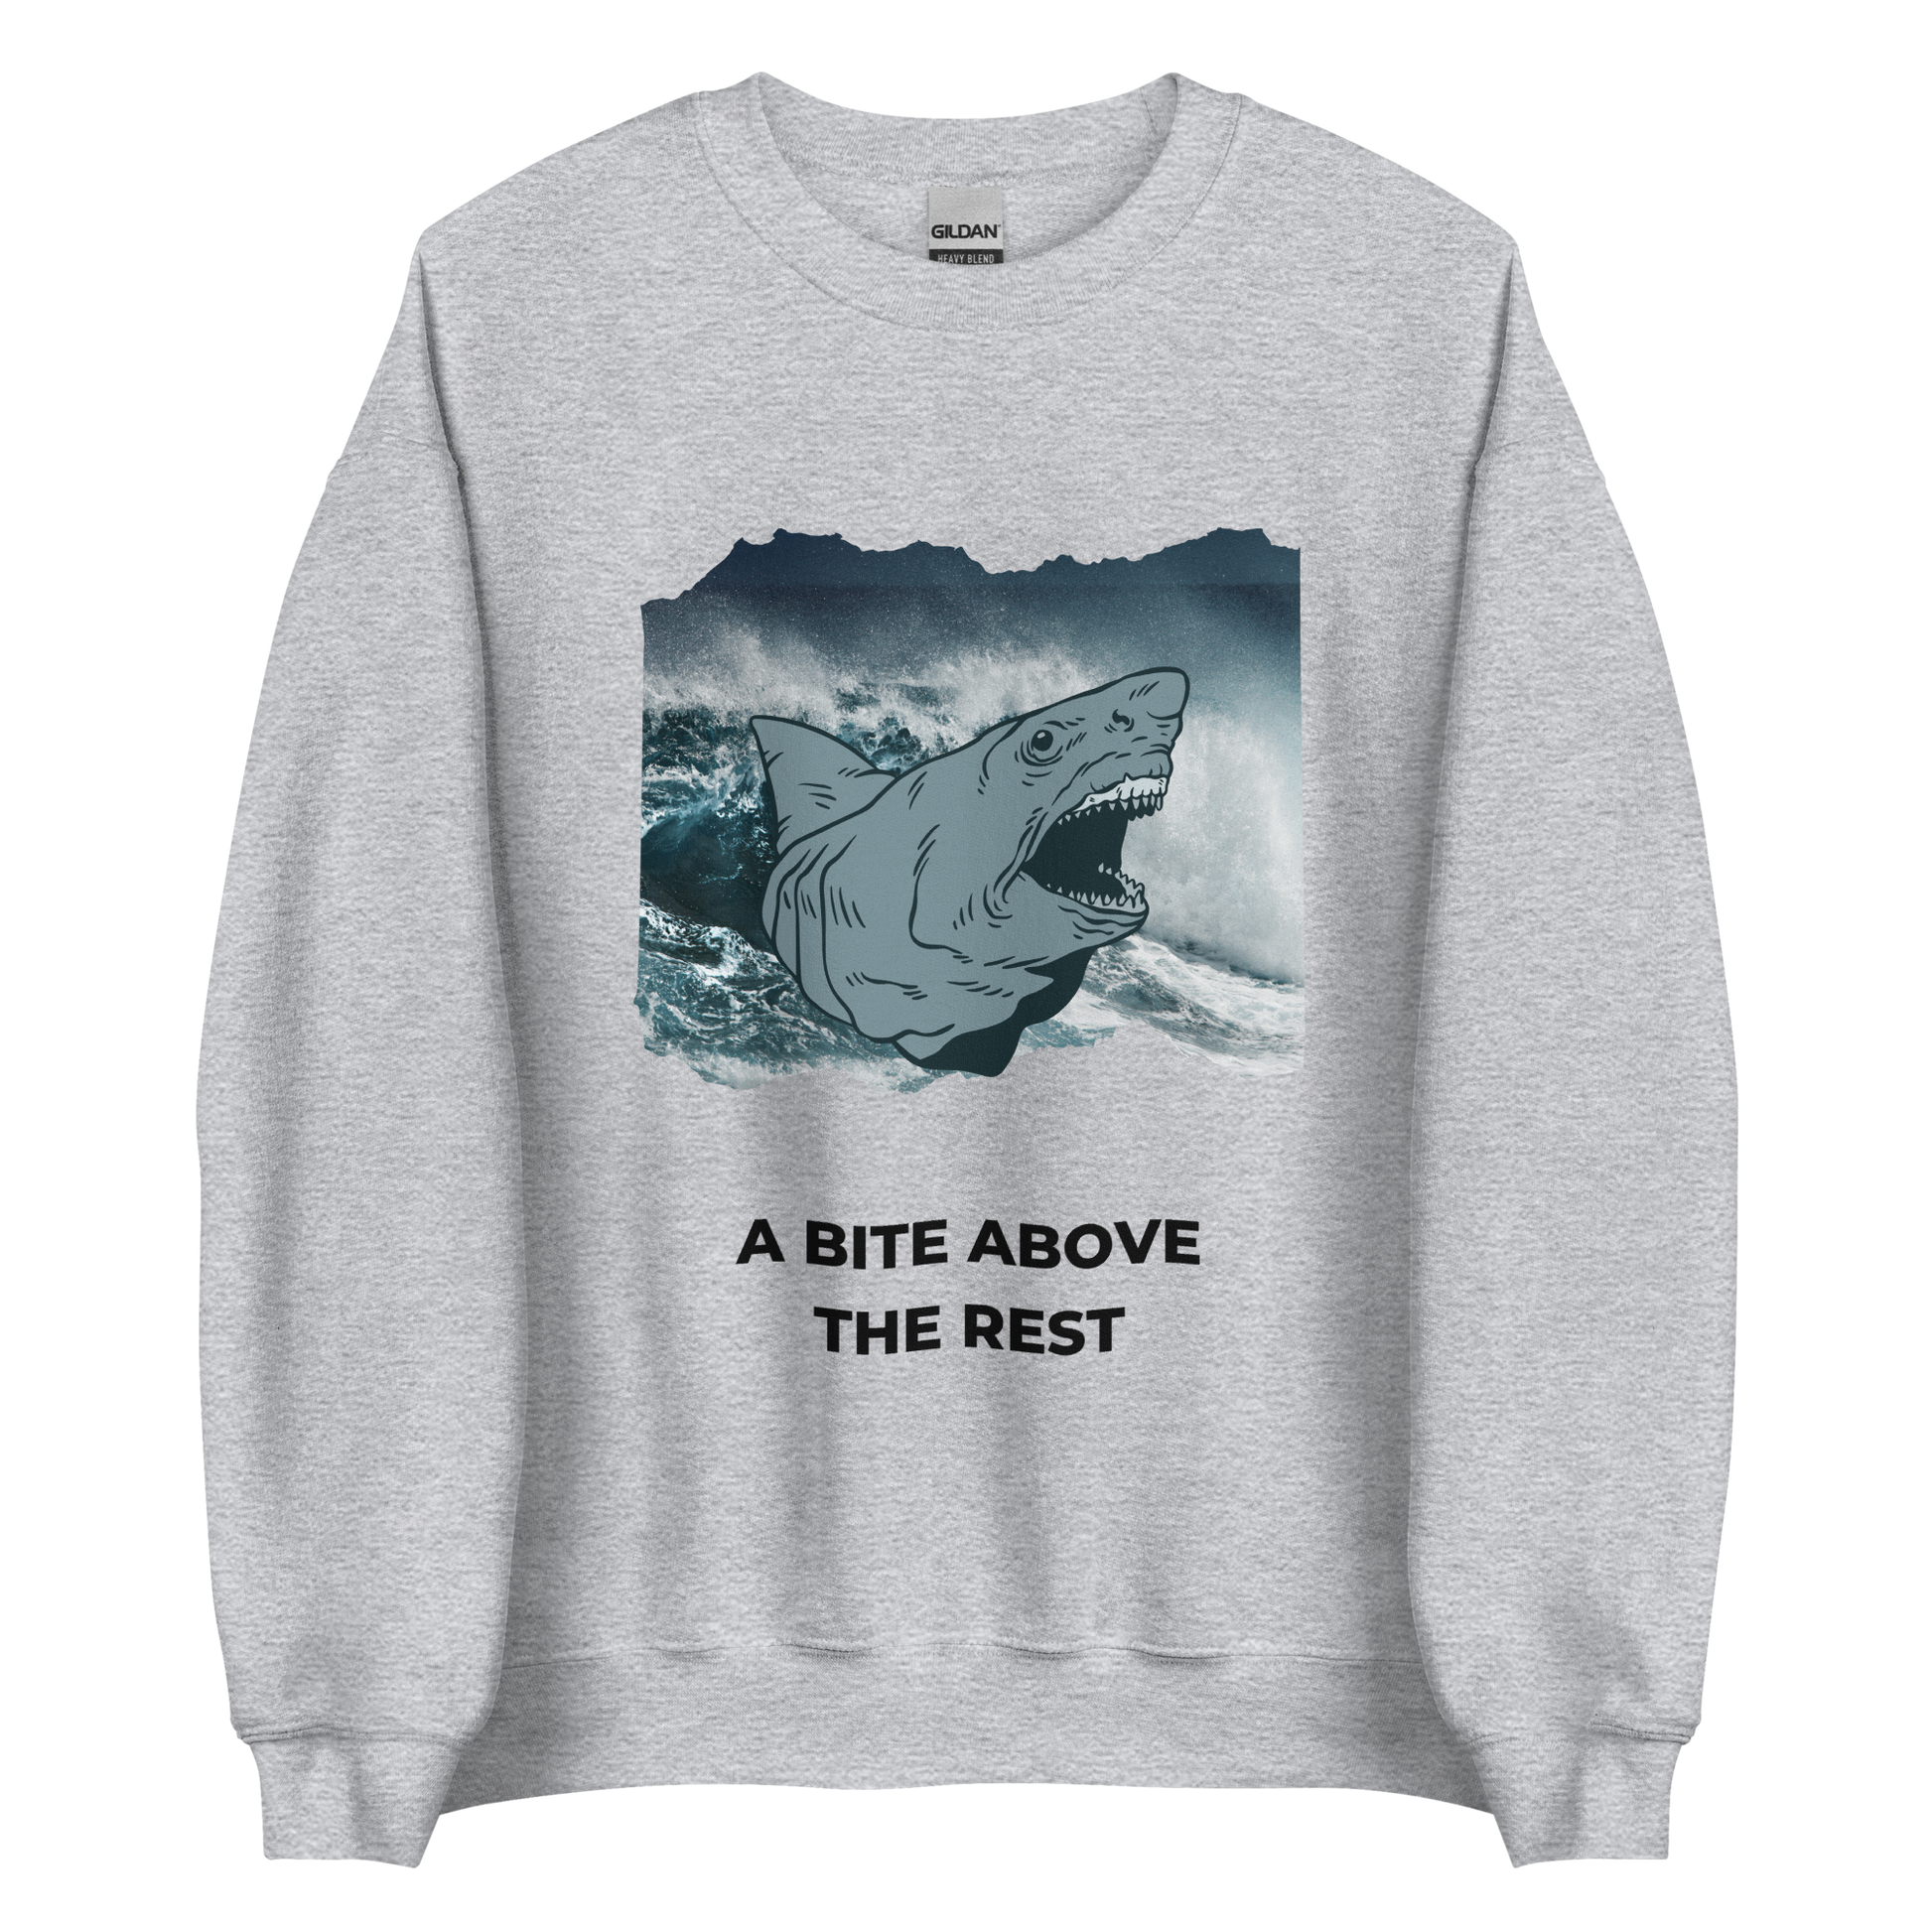 Sport Grey Megalodon Sweatshirt featuring the 'A Bite Above the Rest' graphic on the chest - Funny Graphic Megalodon Sweatshirts - Boozy Fox